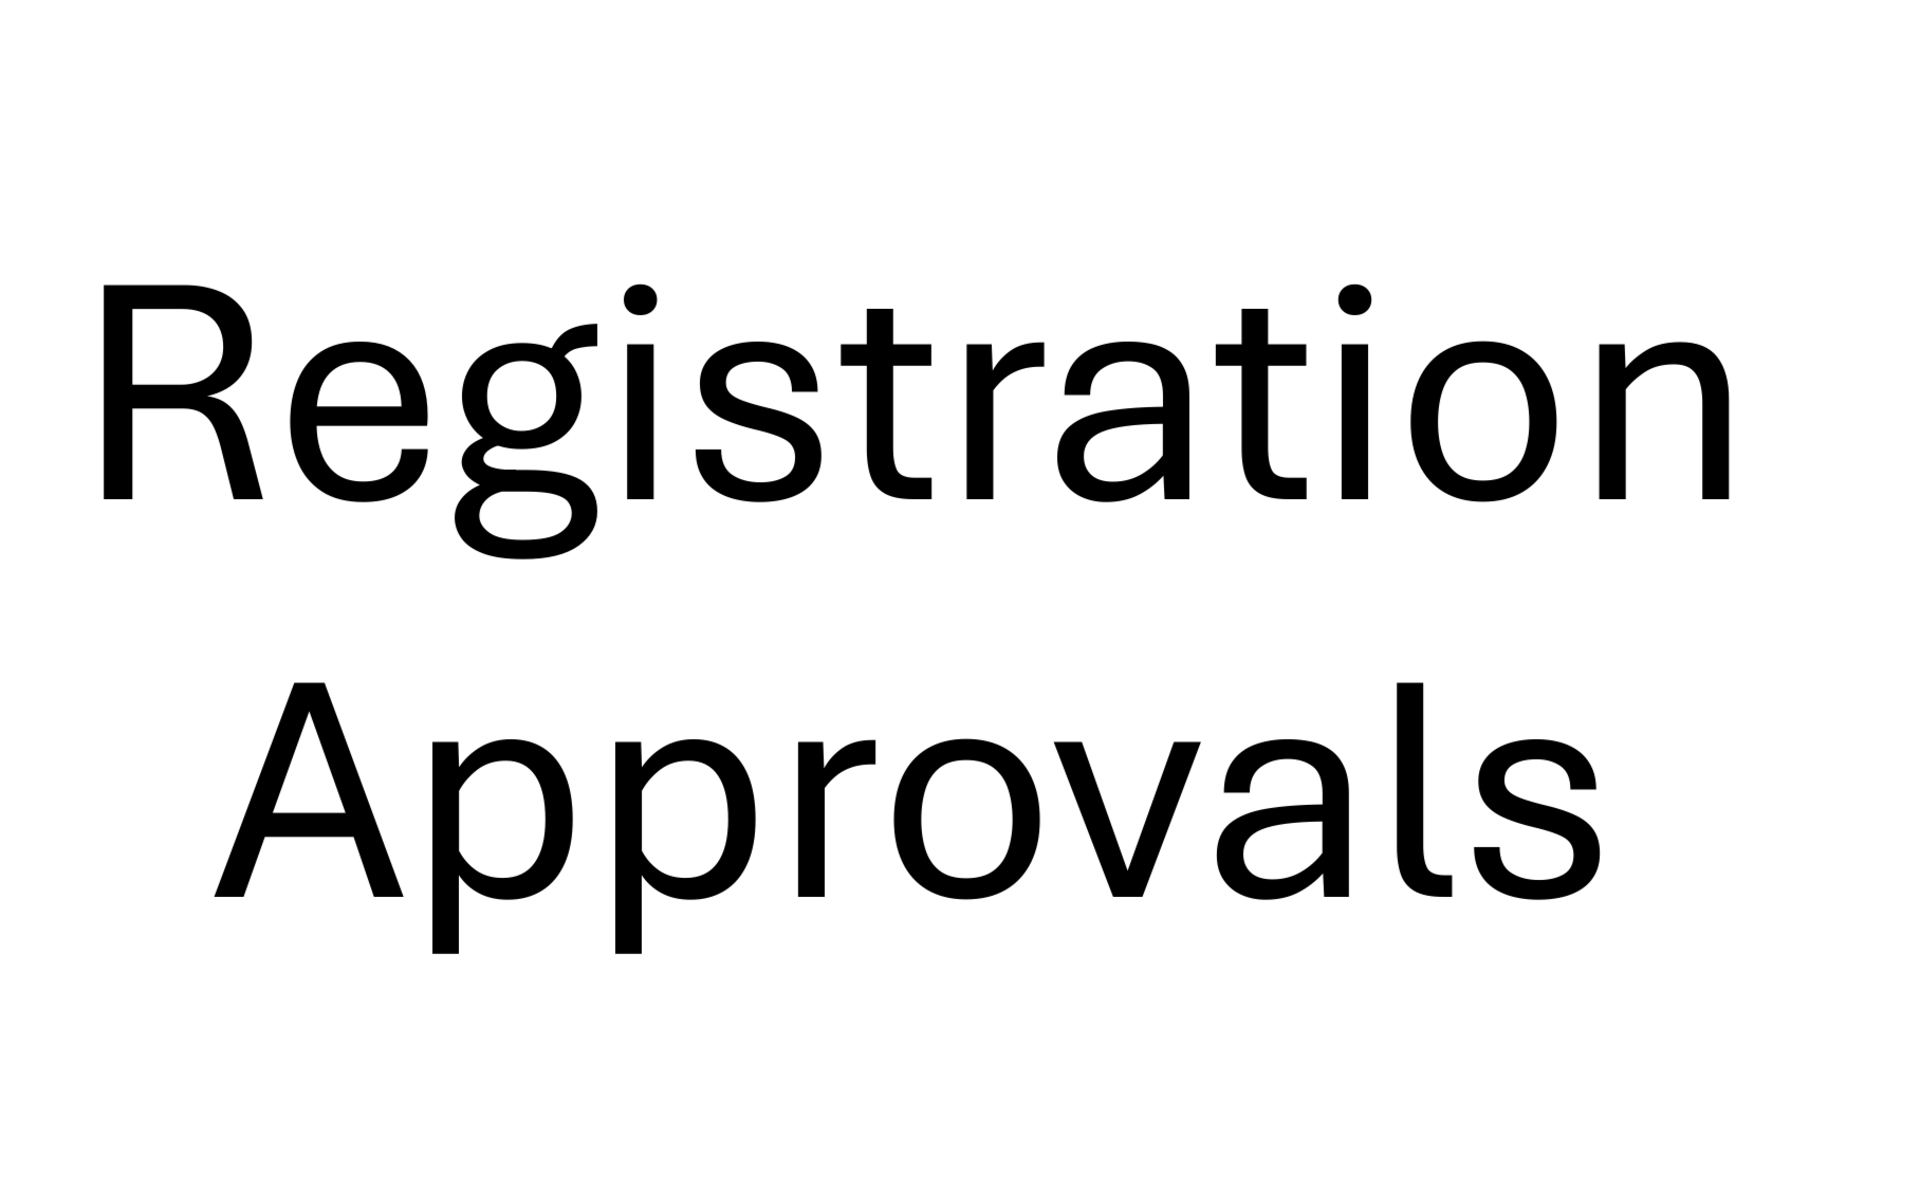 Auction Registration Approvals - Approval process will take place when the sale opens for bidding